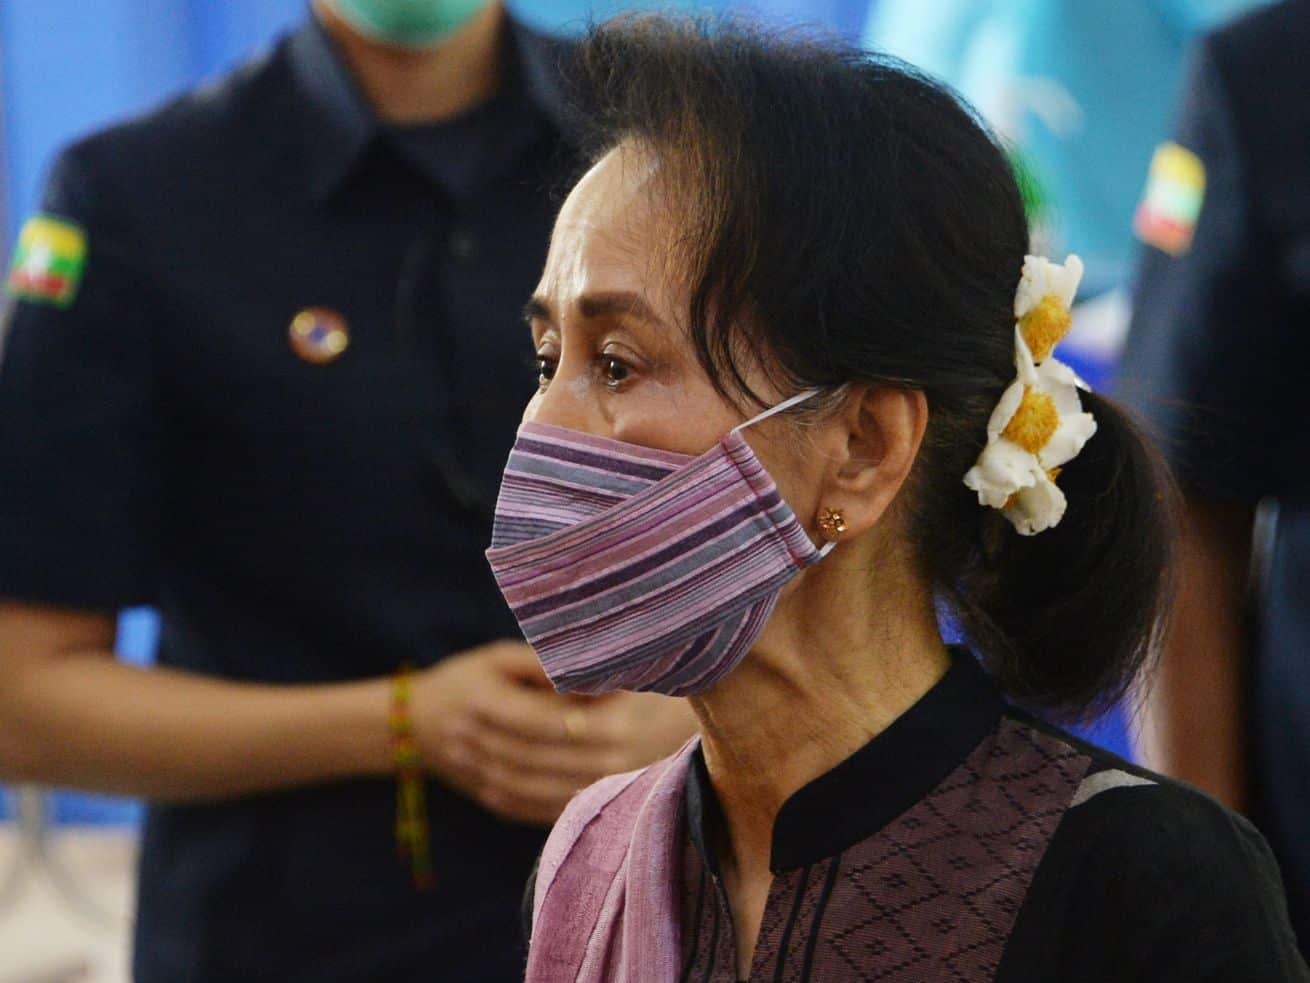 Myanmar’s military is using absurd legal charges to keep leader Aung San Suu Kyi locked up